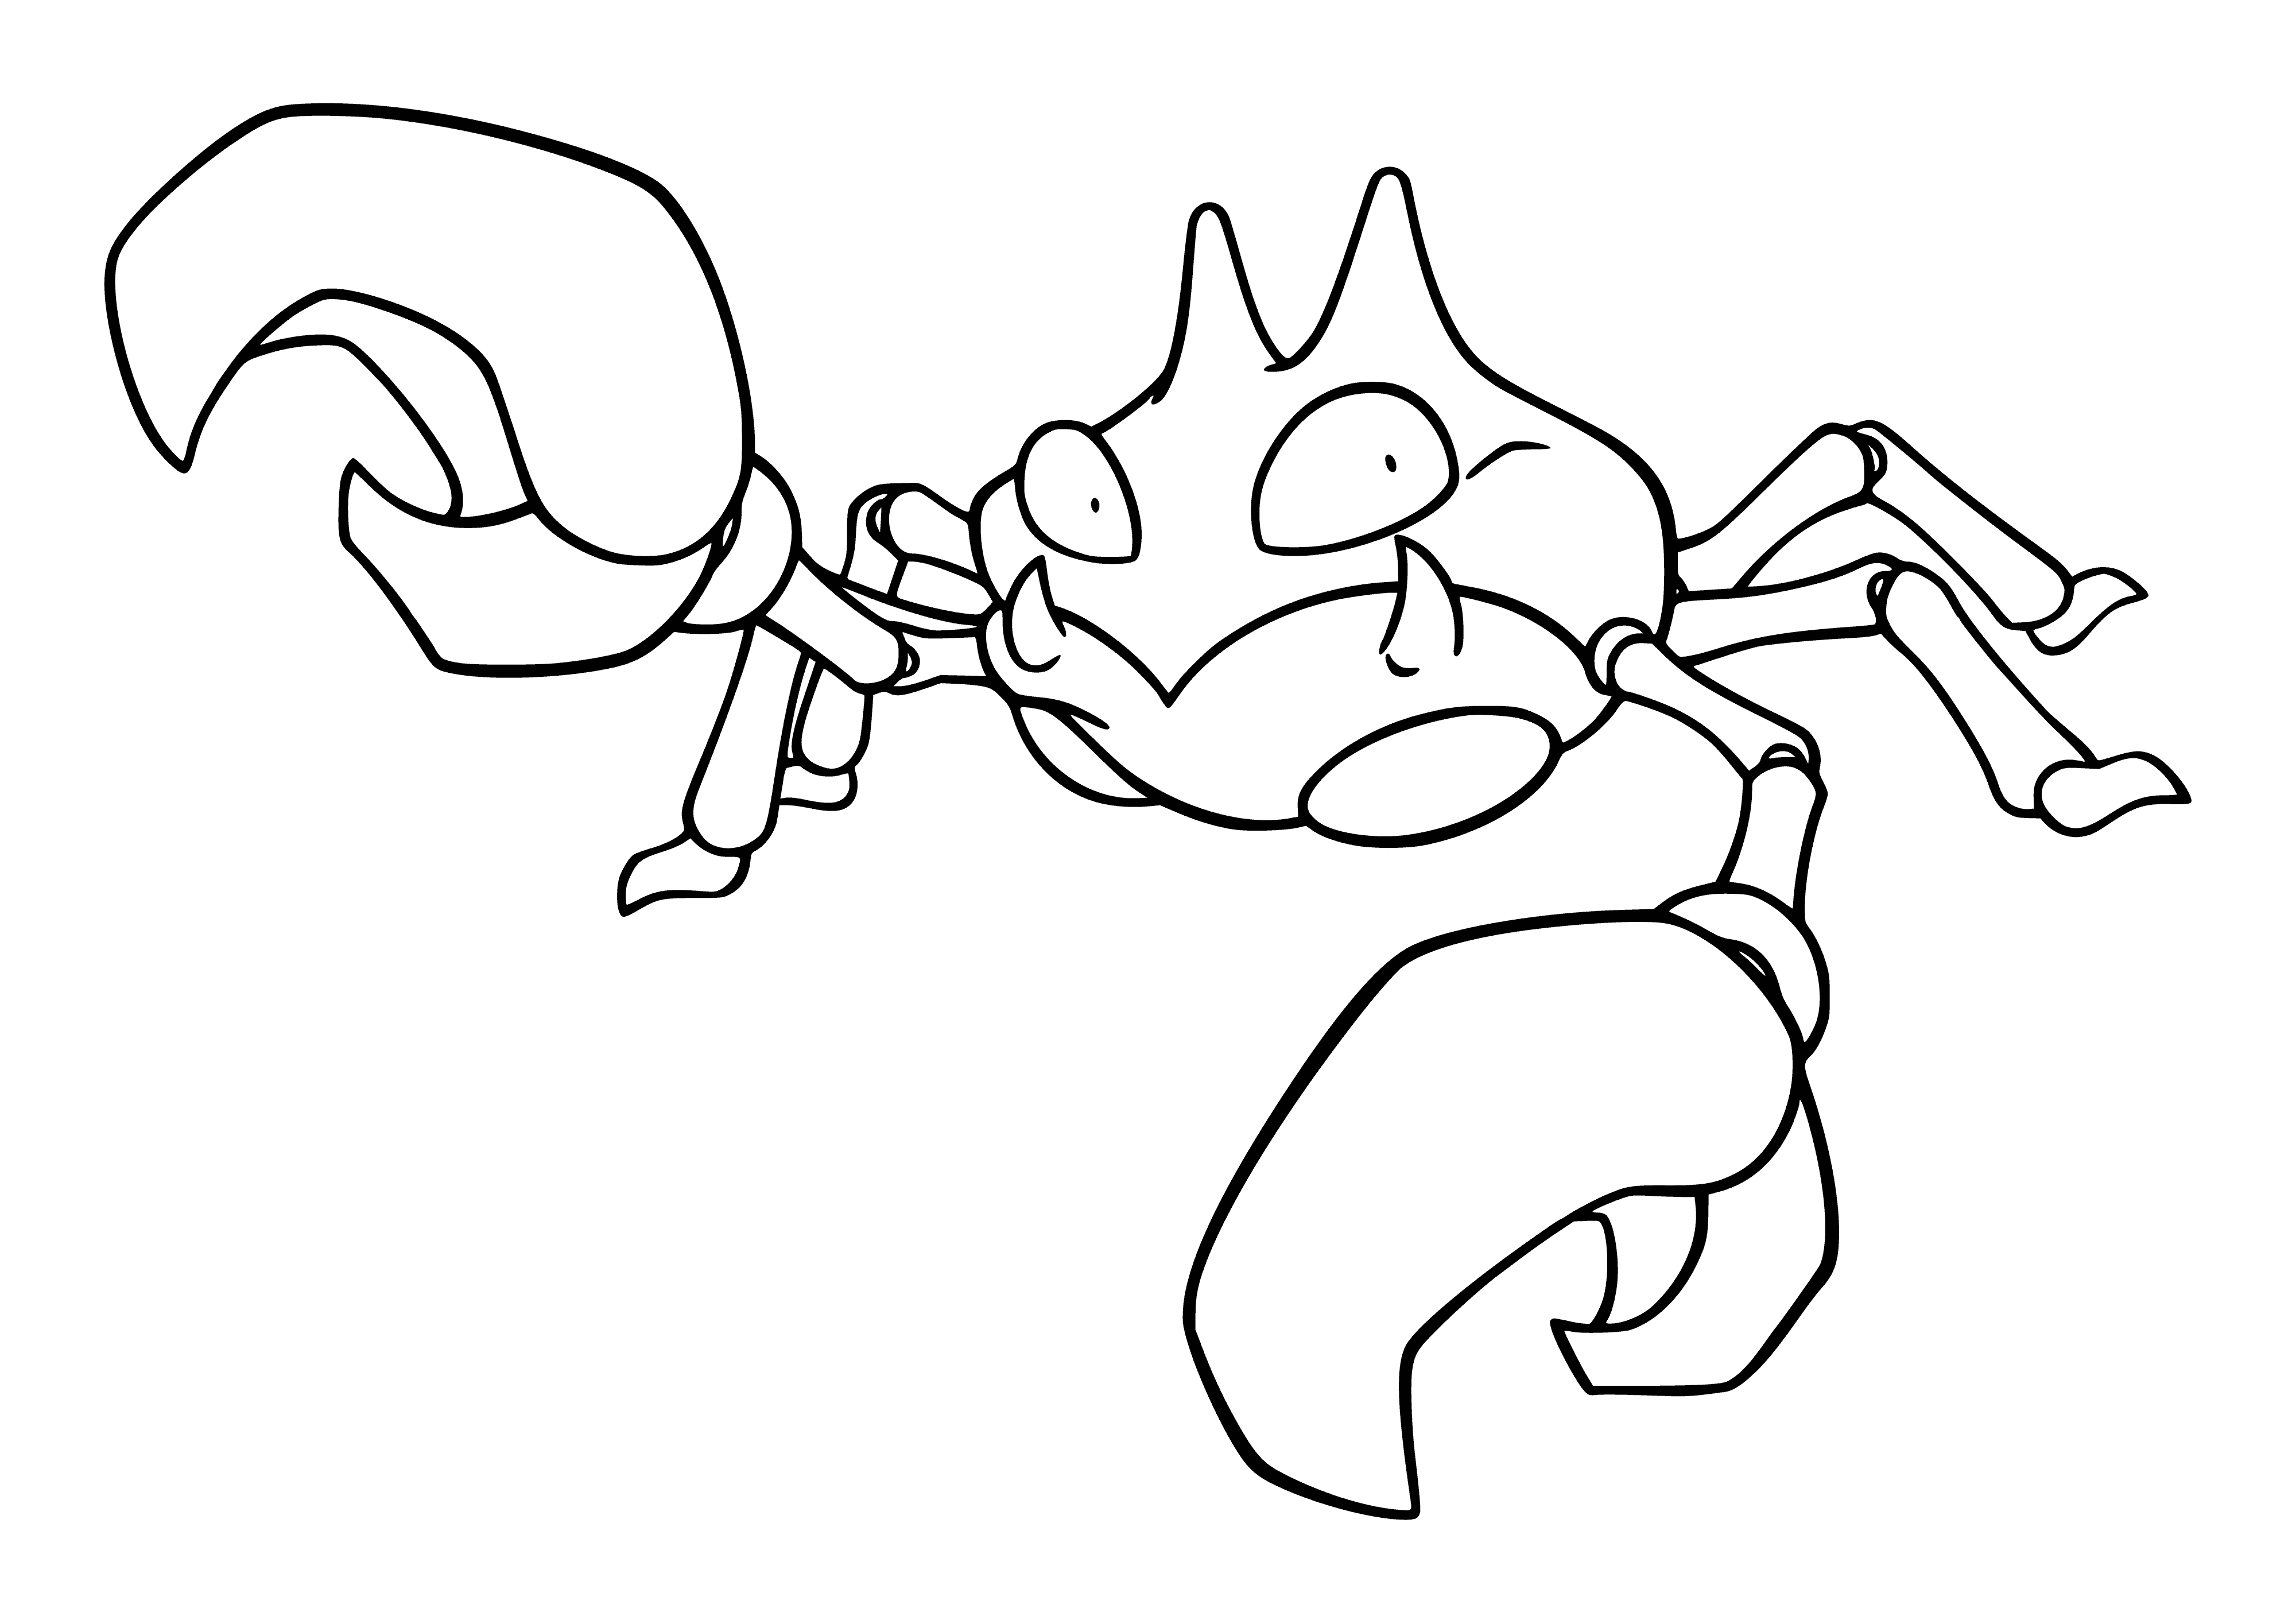 coloring page: Krabby is a crab-like Pokemon with large claws & a hard shell for defense; can evolve into Kingler.